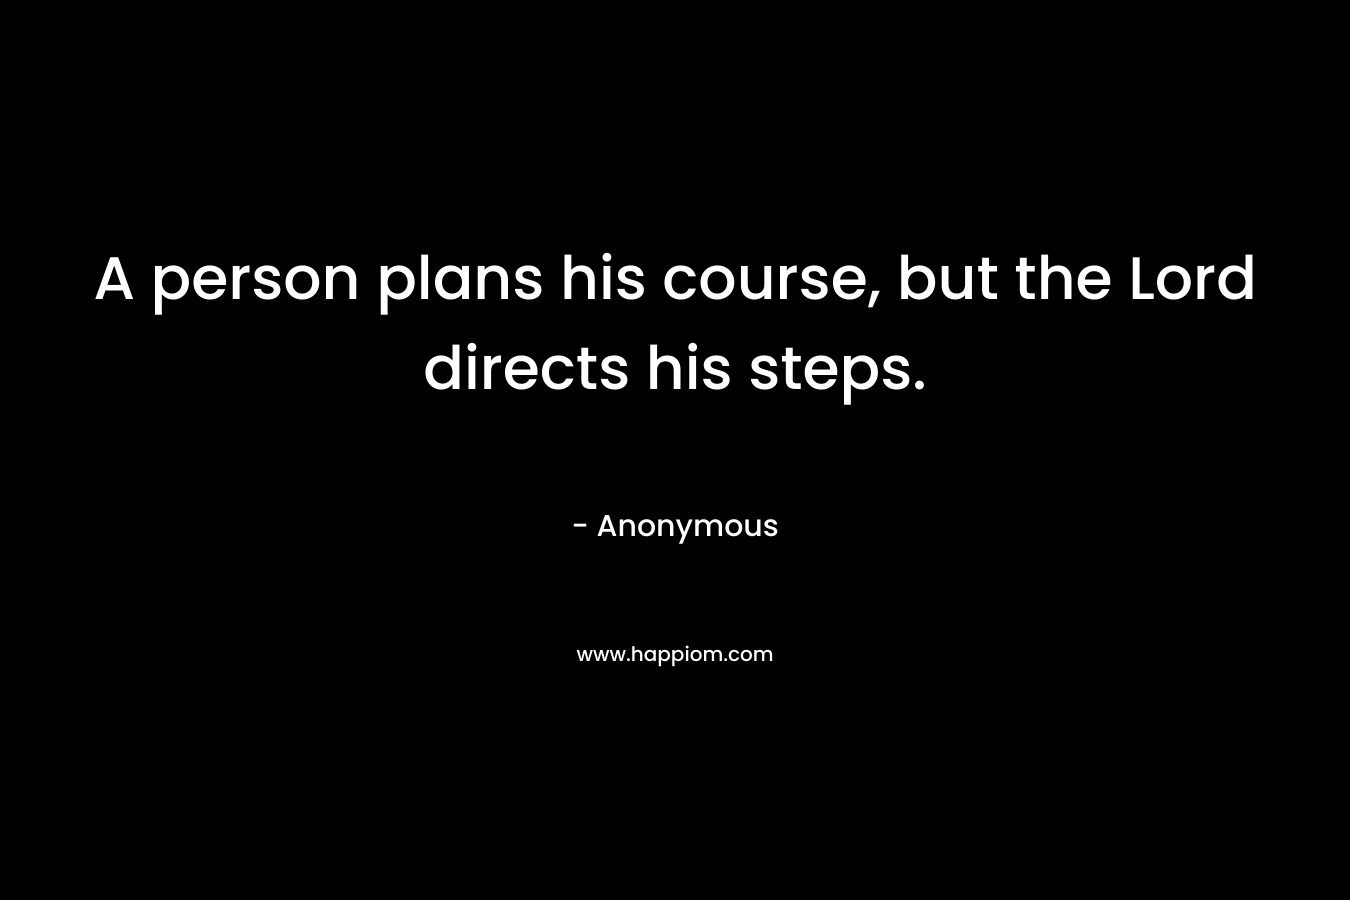 A person plans his course, but the Lord directs his steps.